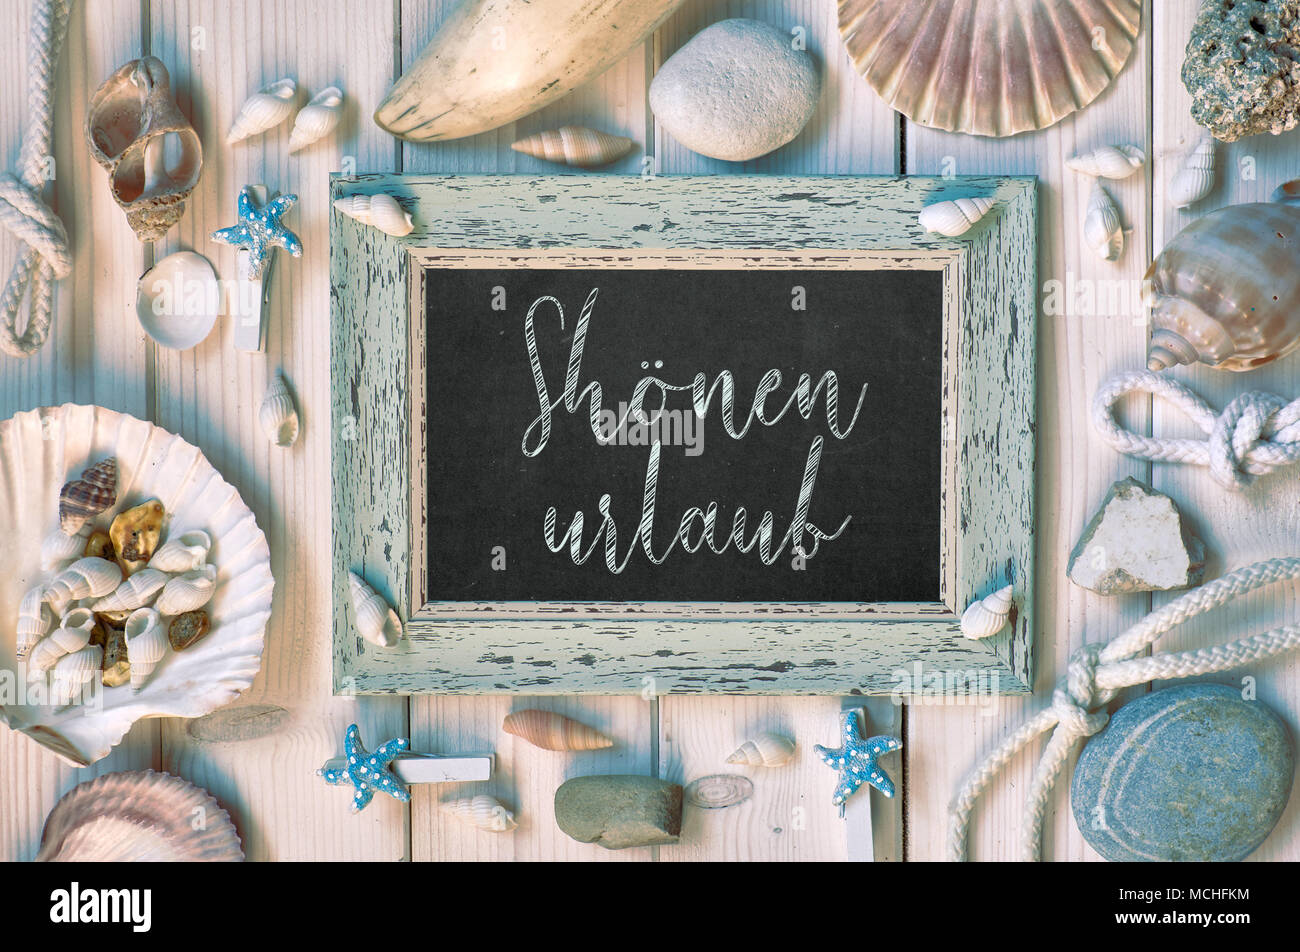 Blackboard With Maritime Decorations on light wood, text in German, 'Shonen urlaub' Means 'Happy holidays' Stock Photo